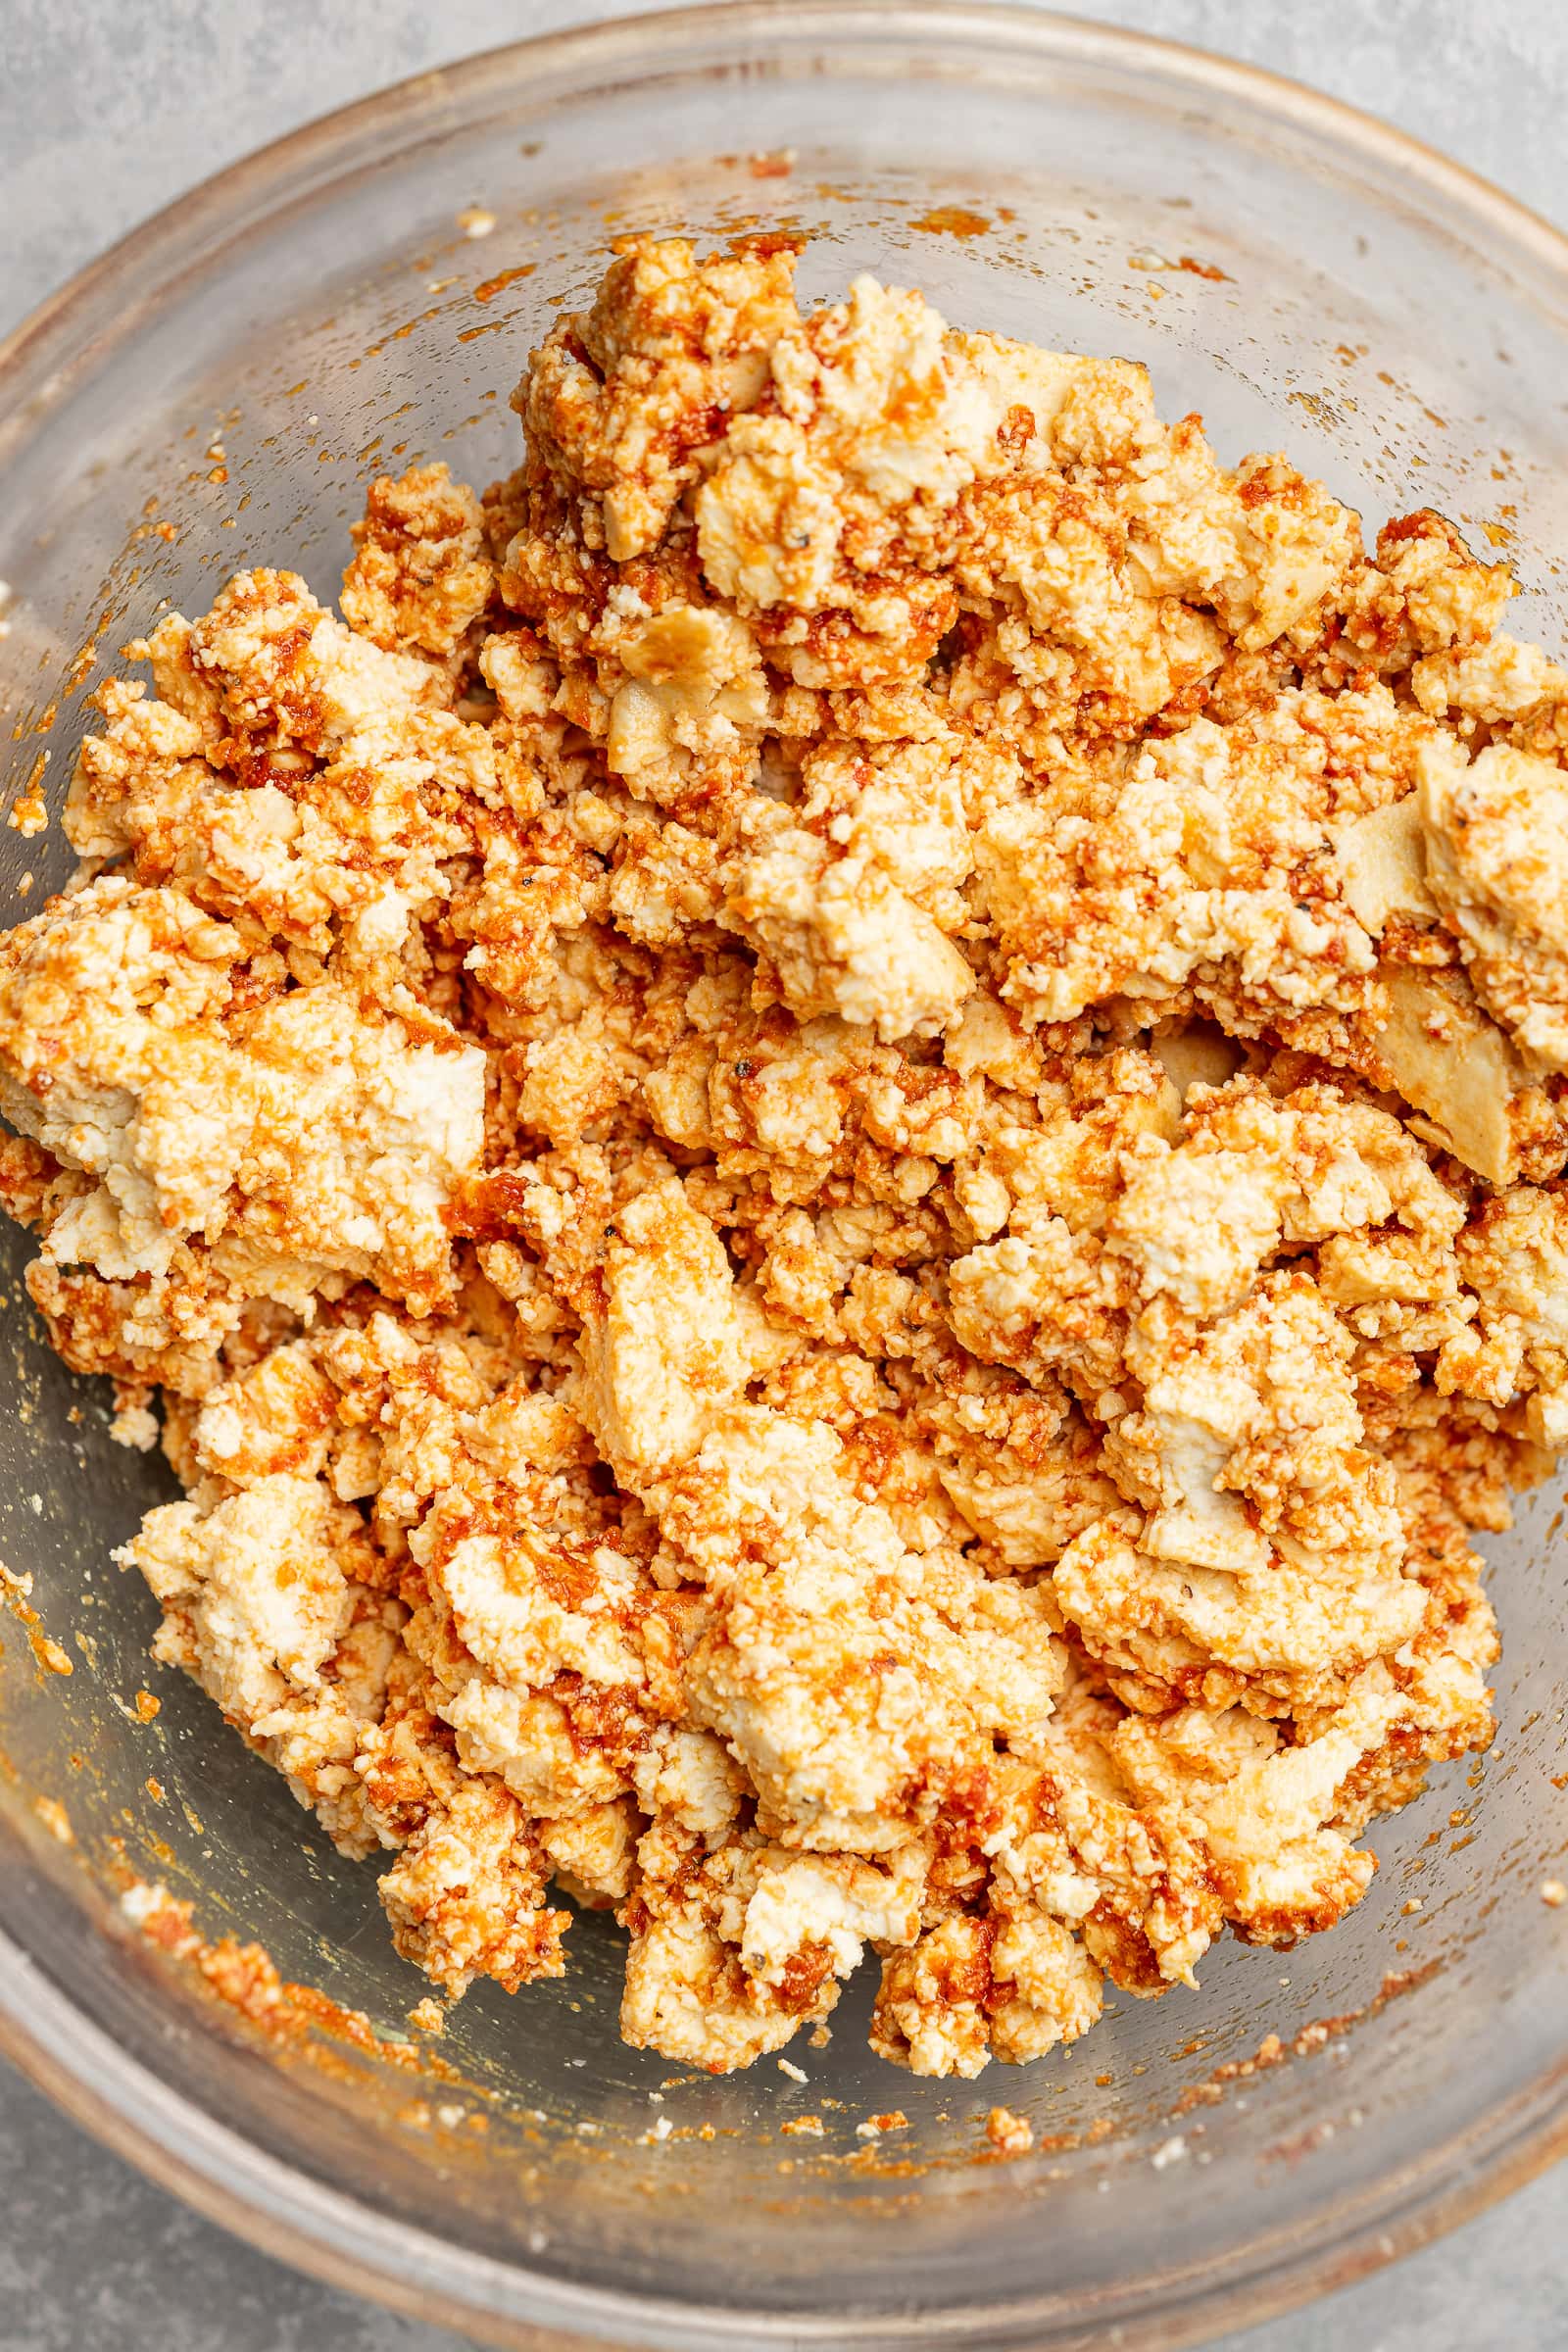 Crumbled tofu tossed into a tomato paste seasoning mixture.